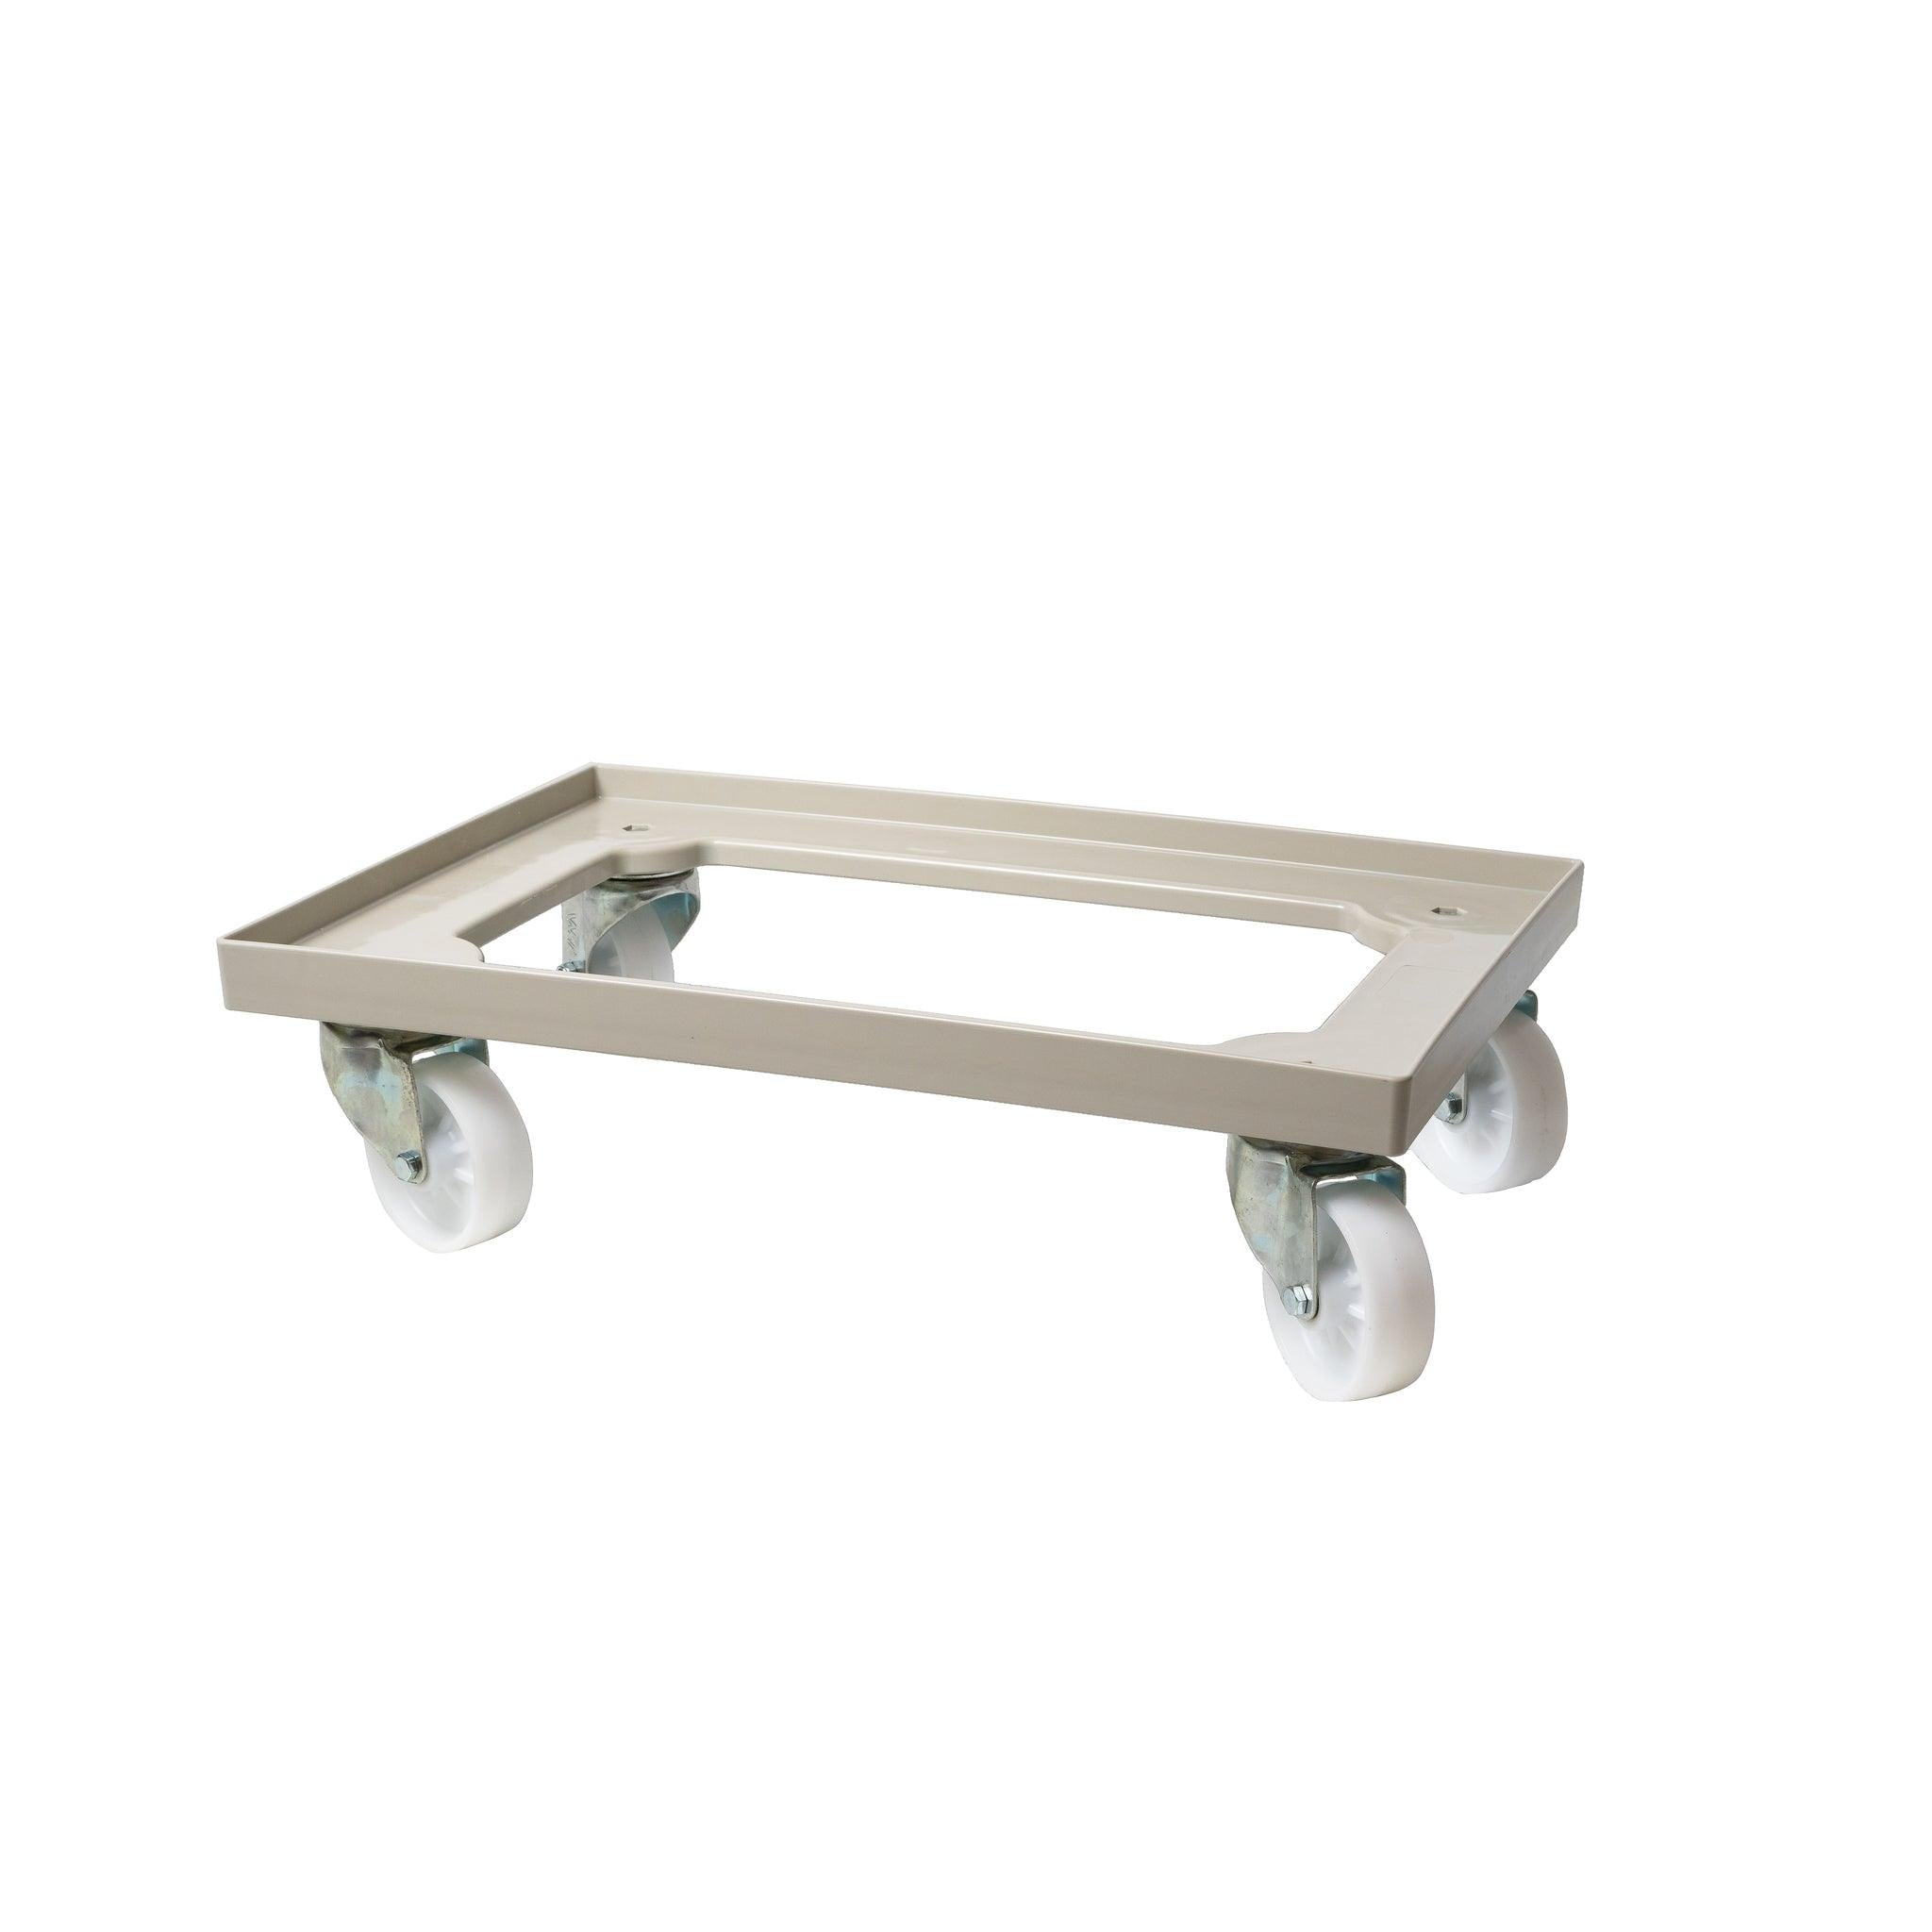 CA6040 - Dough Box Dolly with Casters - AMPTO